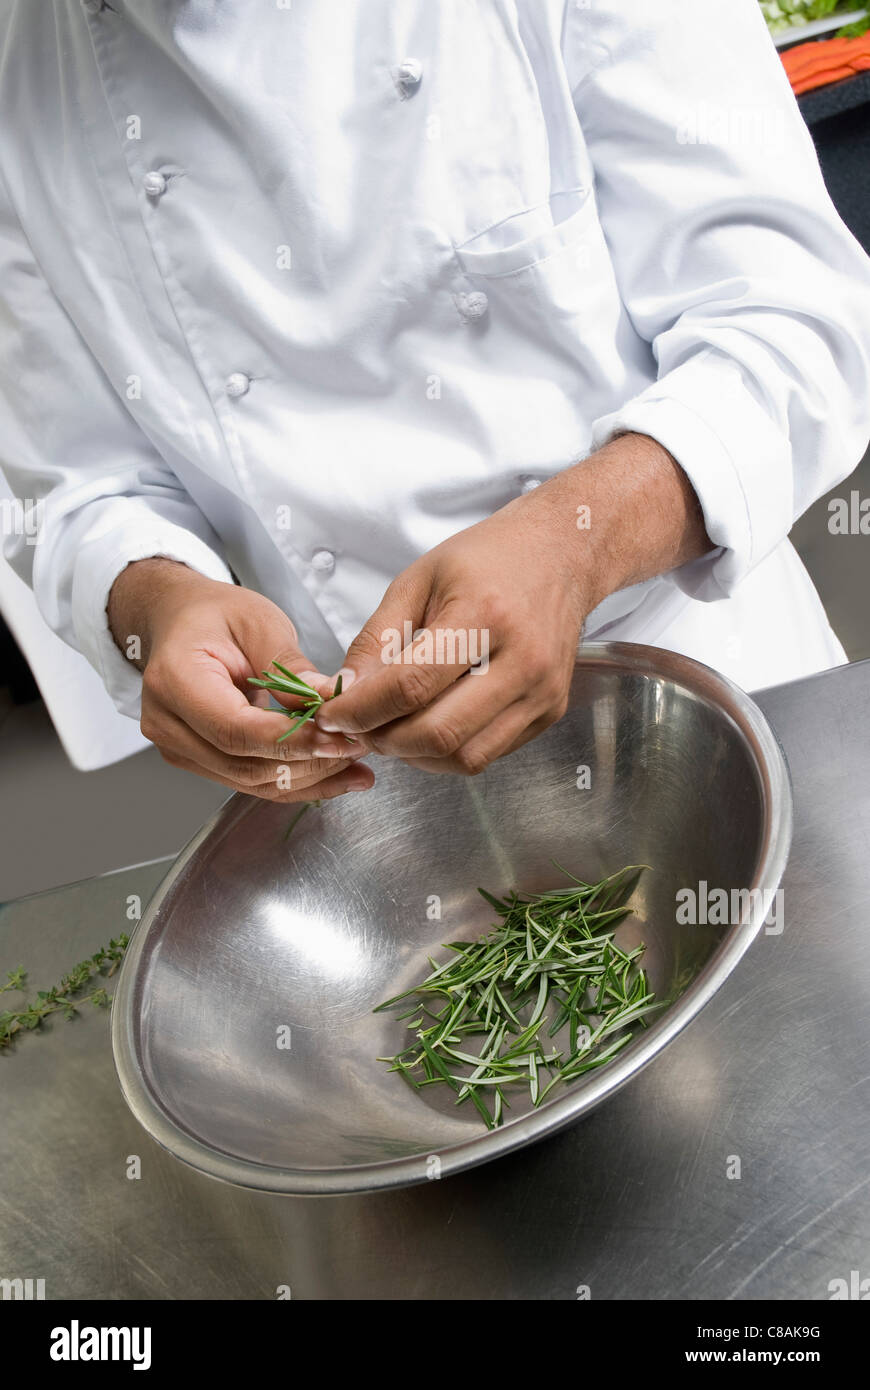 Removing the leaves from the rosemary Stock Photo